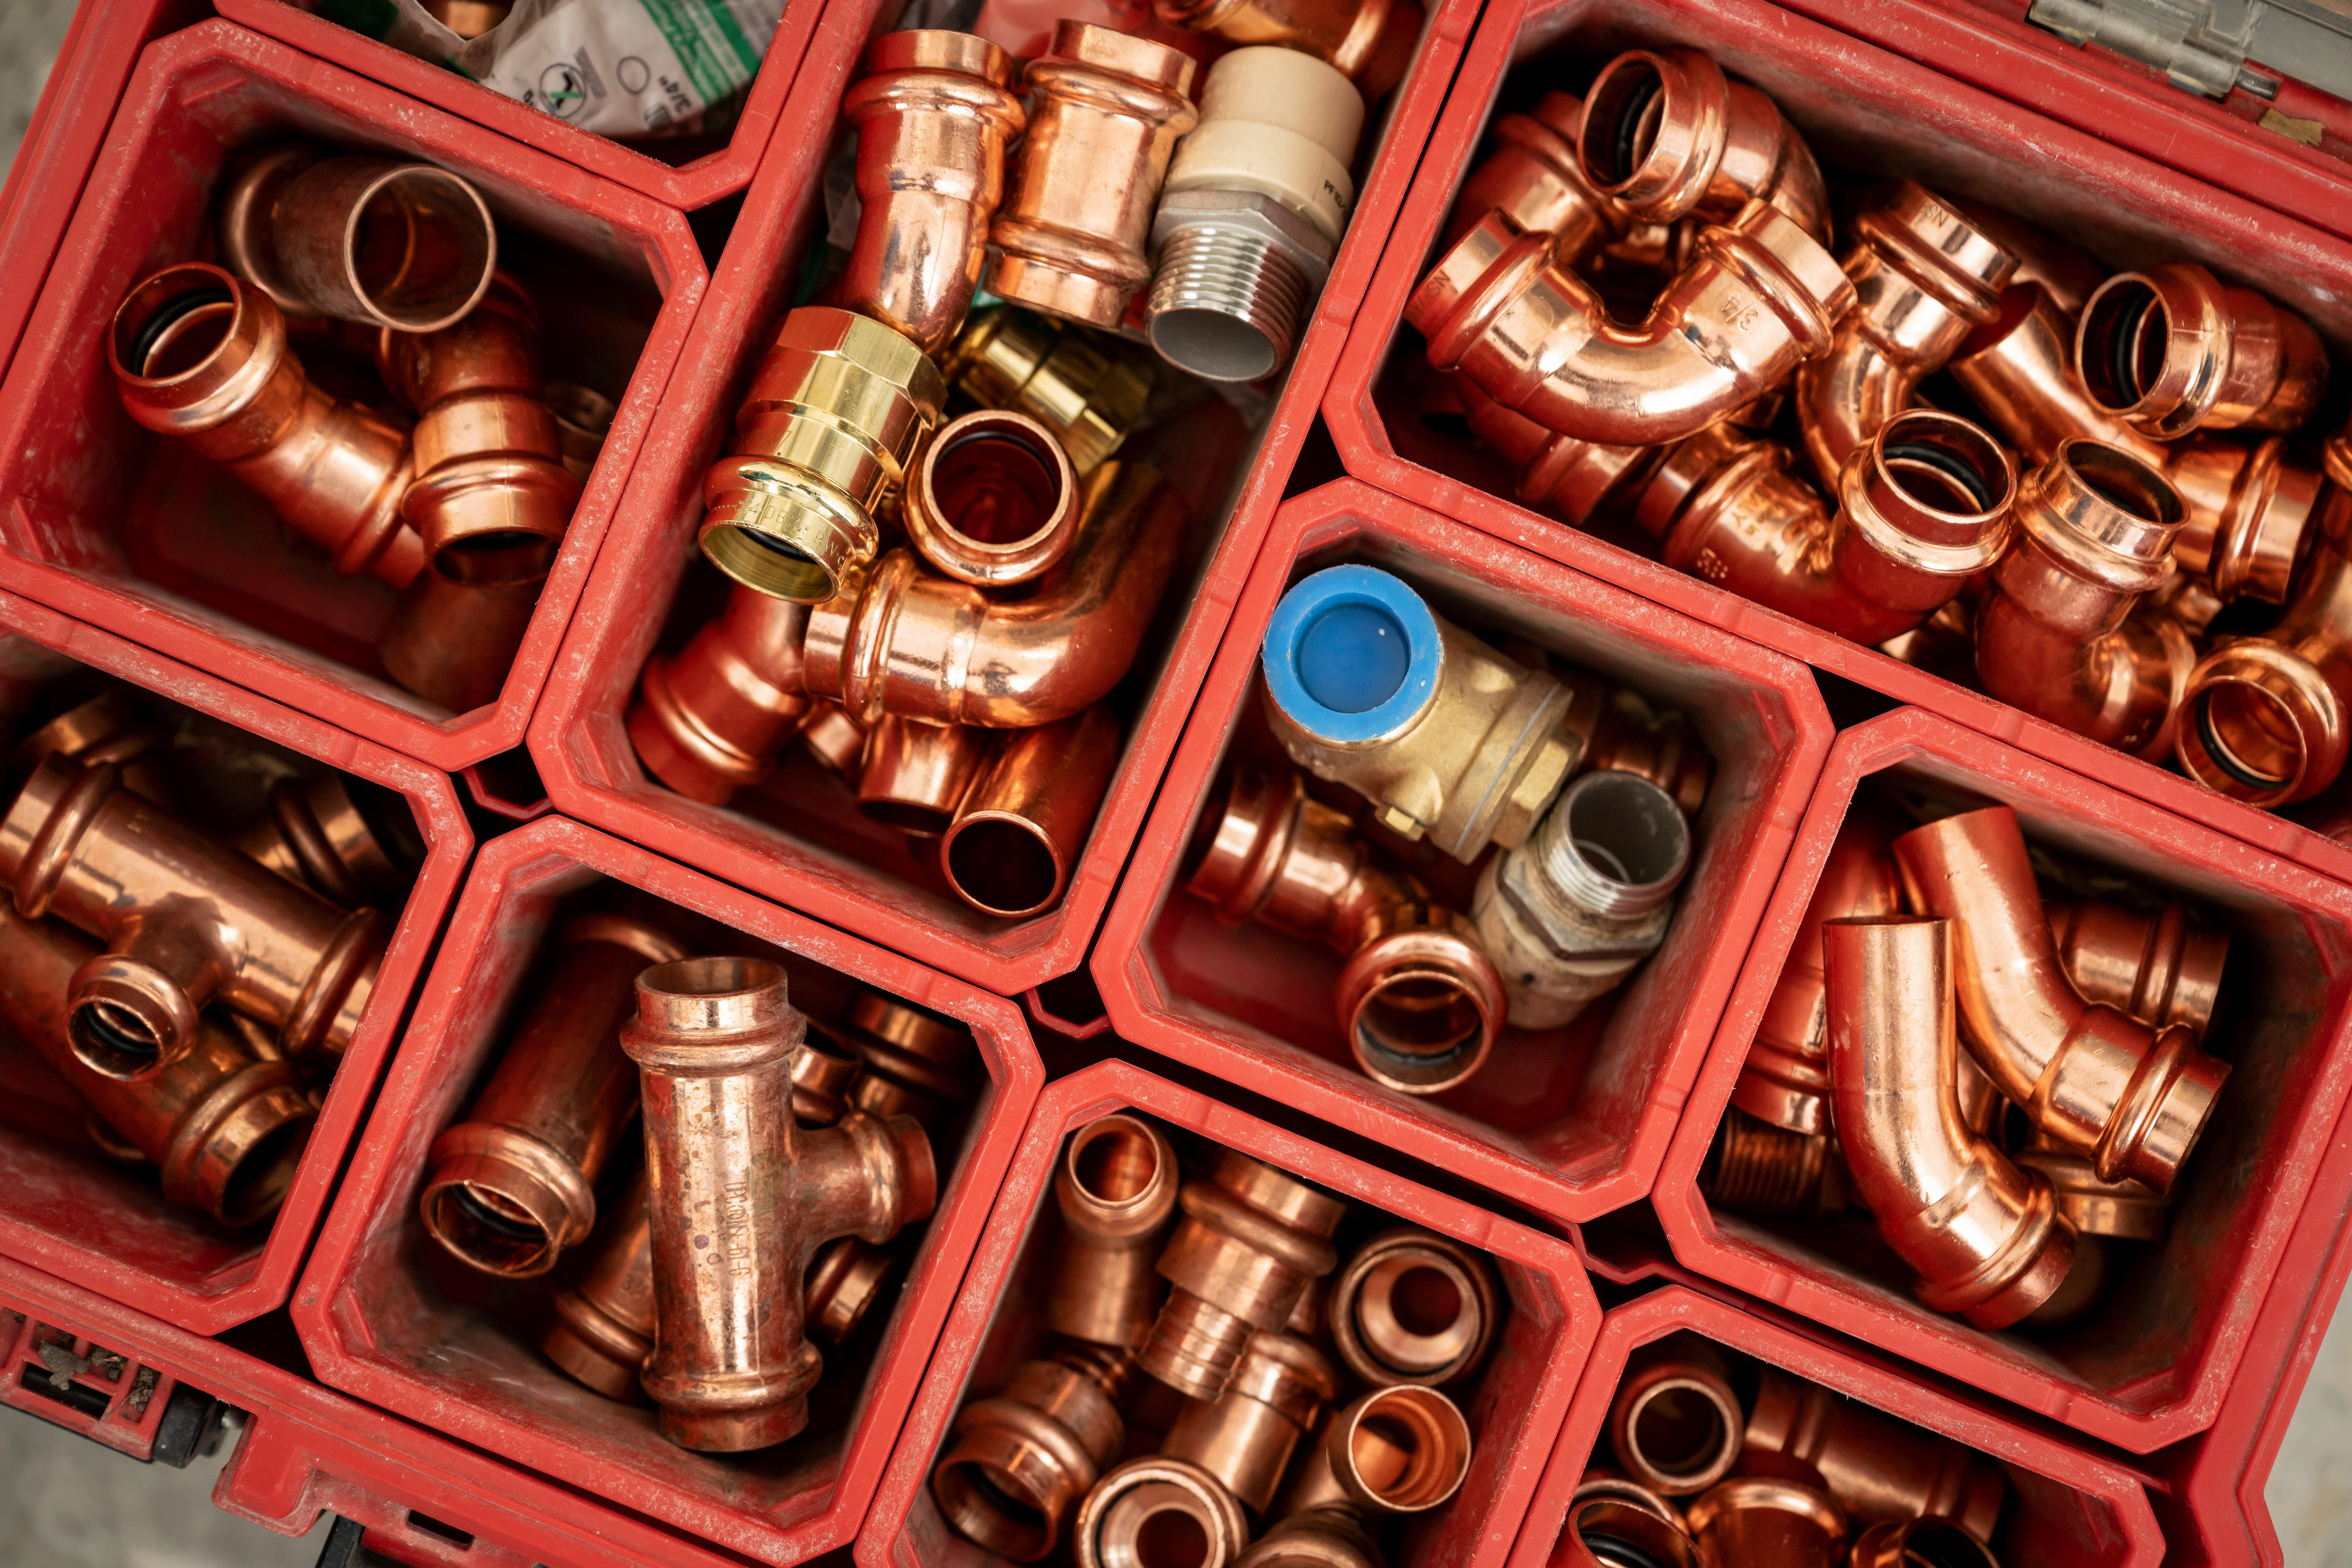 Plumbing parts, pipe, valves and fittings separated in a red toolbox.